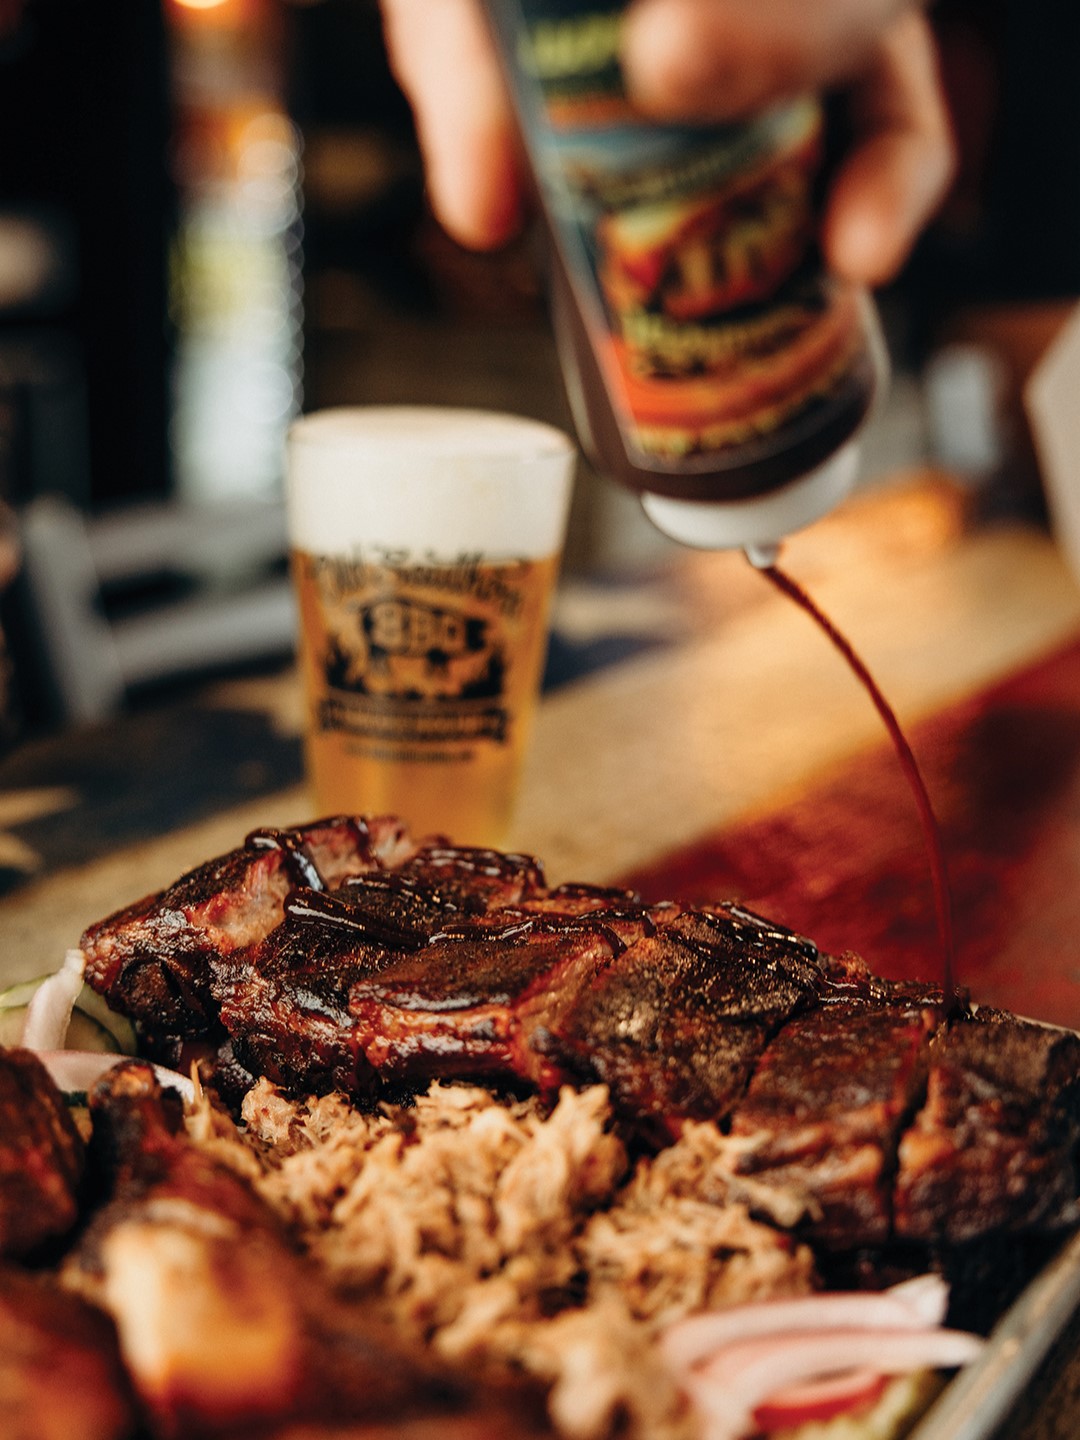 Turn up the heat on flavor with Chicago Fire BBQ Sauce. It’s a spicy zing for the tastebuds.